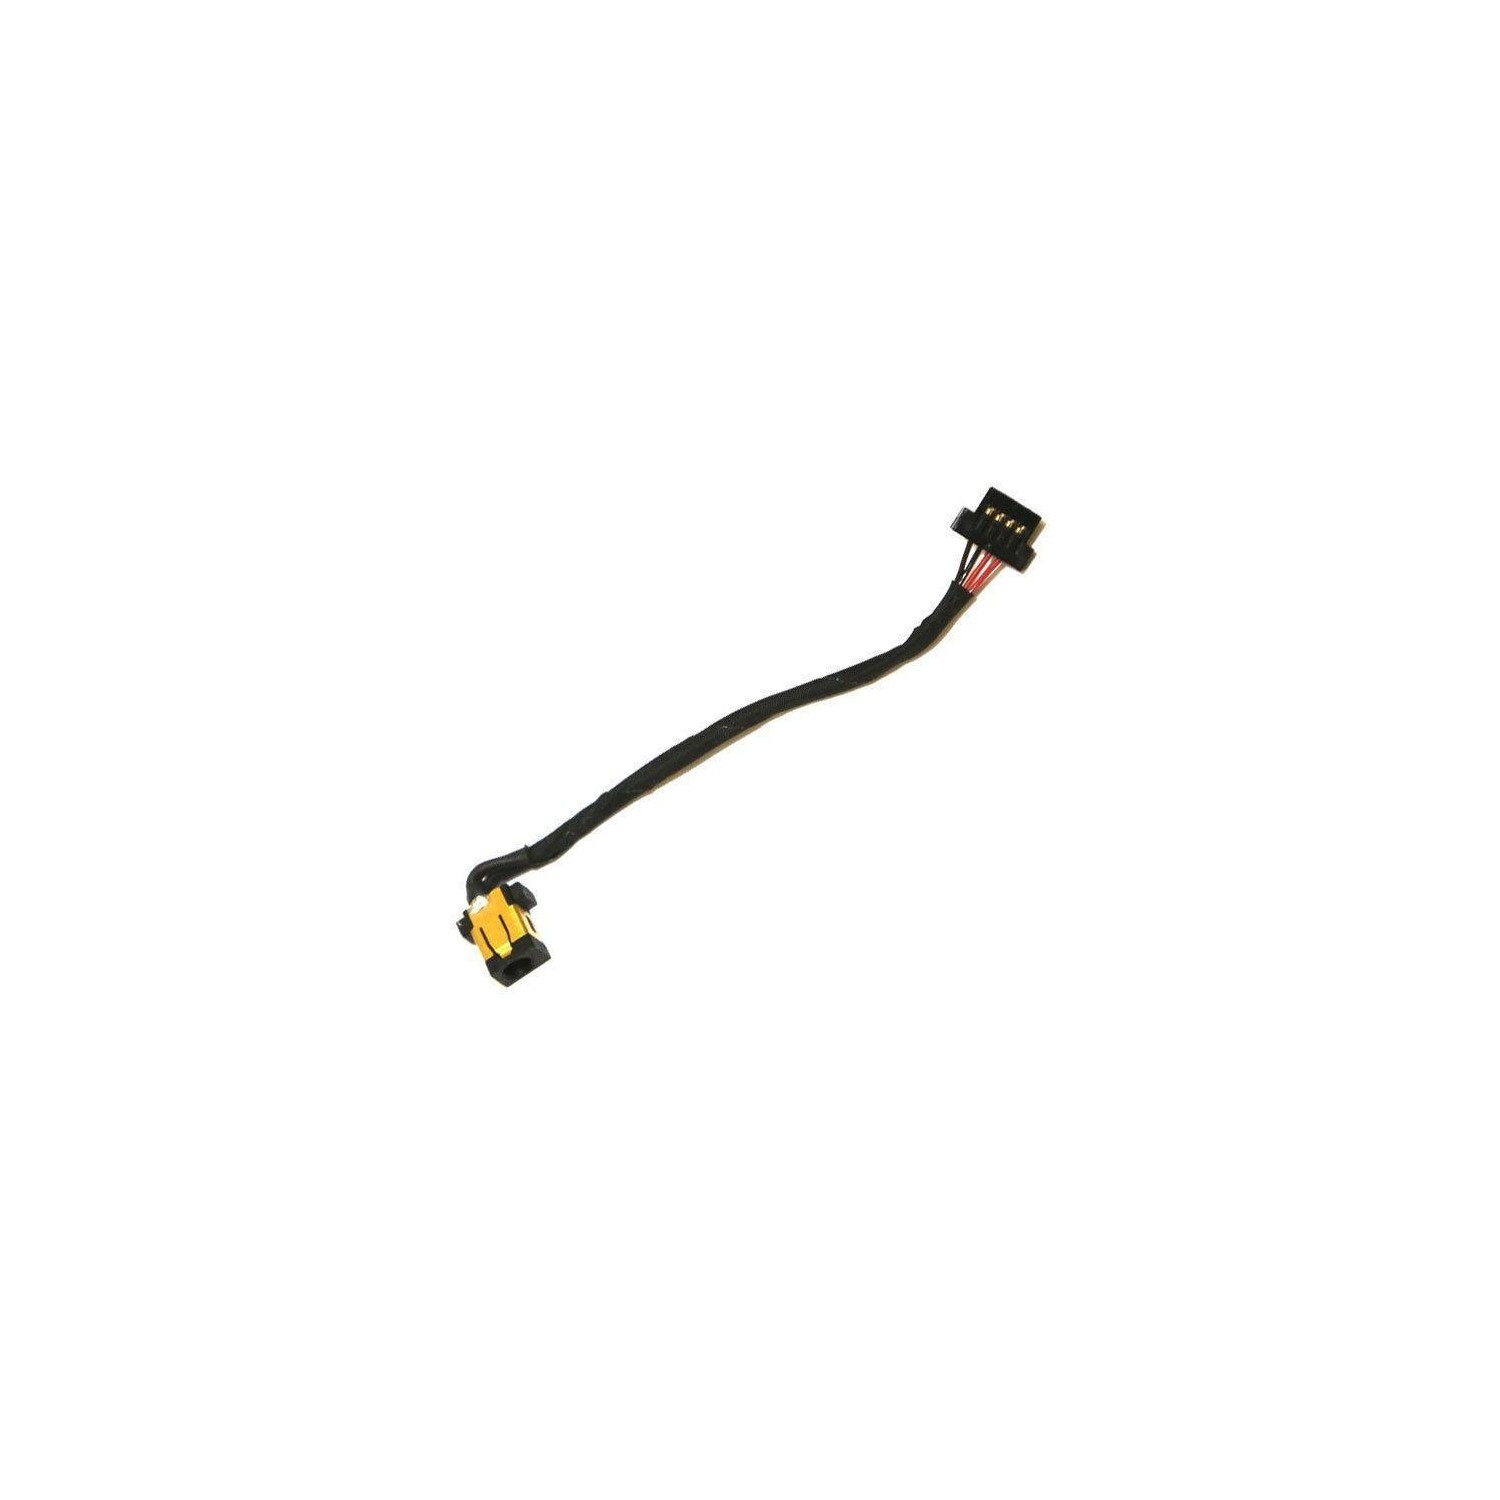 CABLE JACK PARA ACER ASPIRE SWITCH 10 SW5-011 SW5-012 PJ790